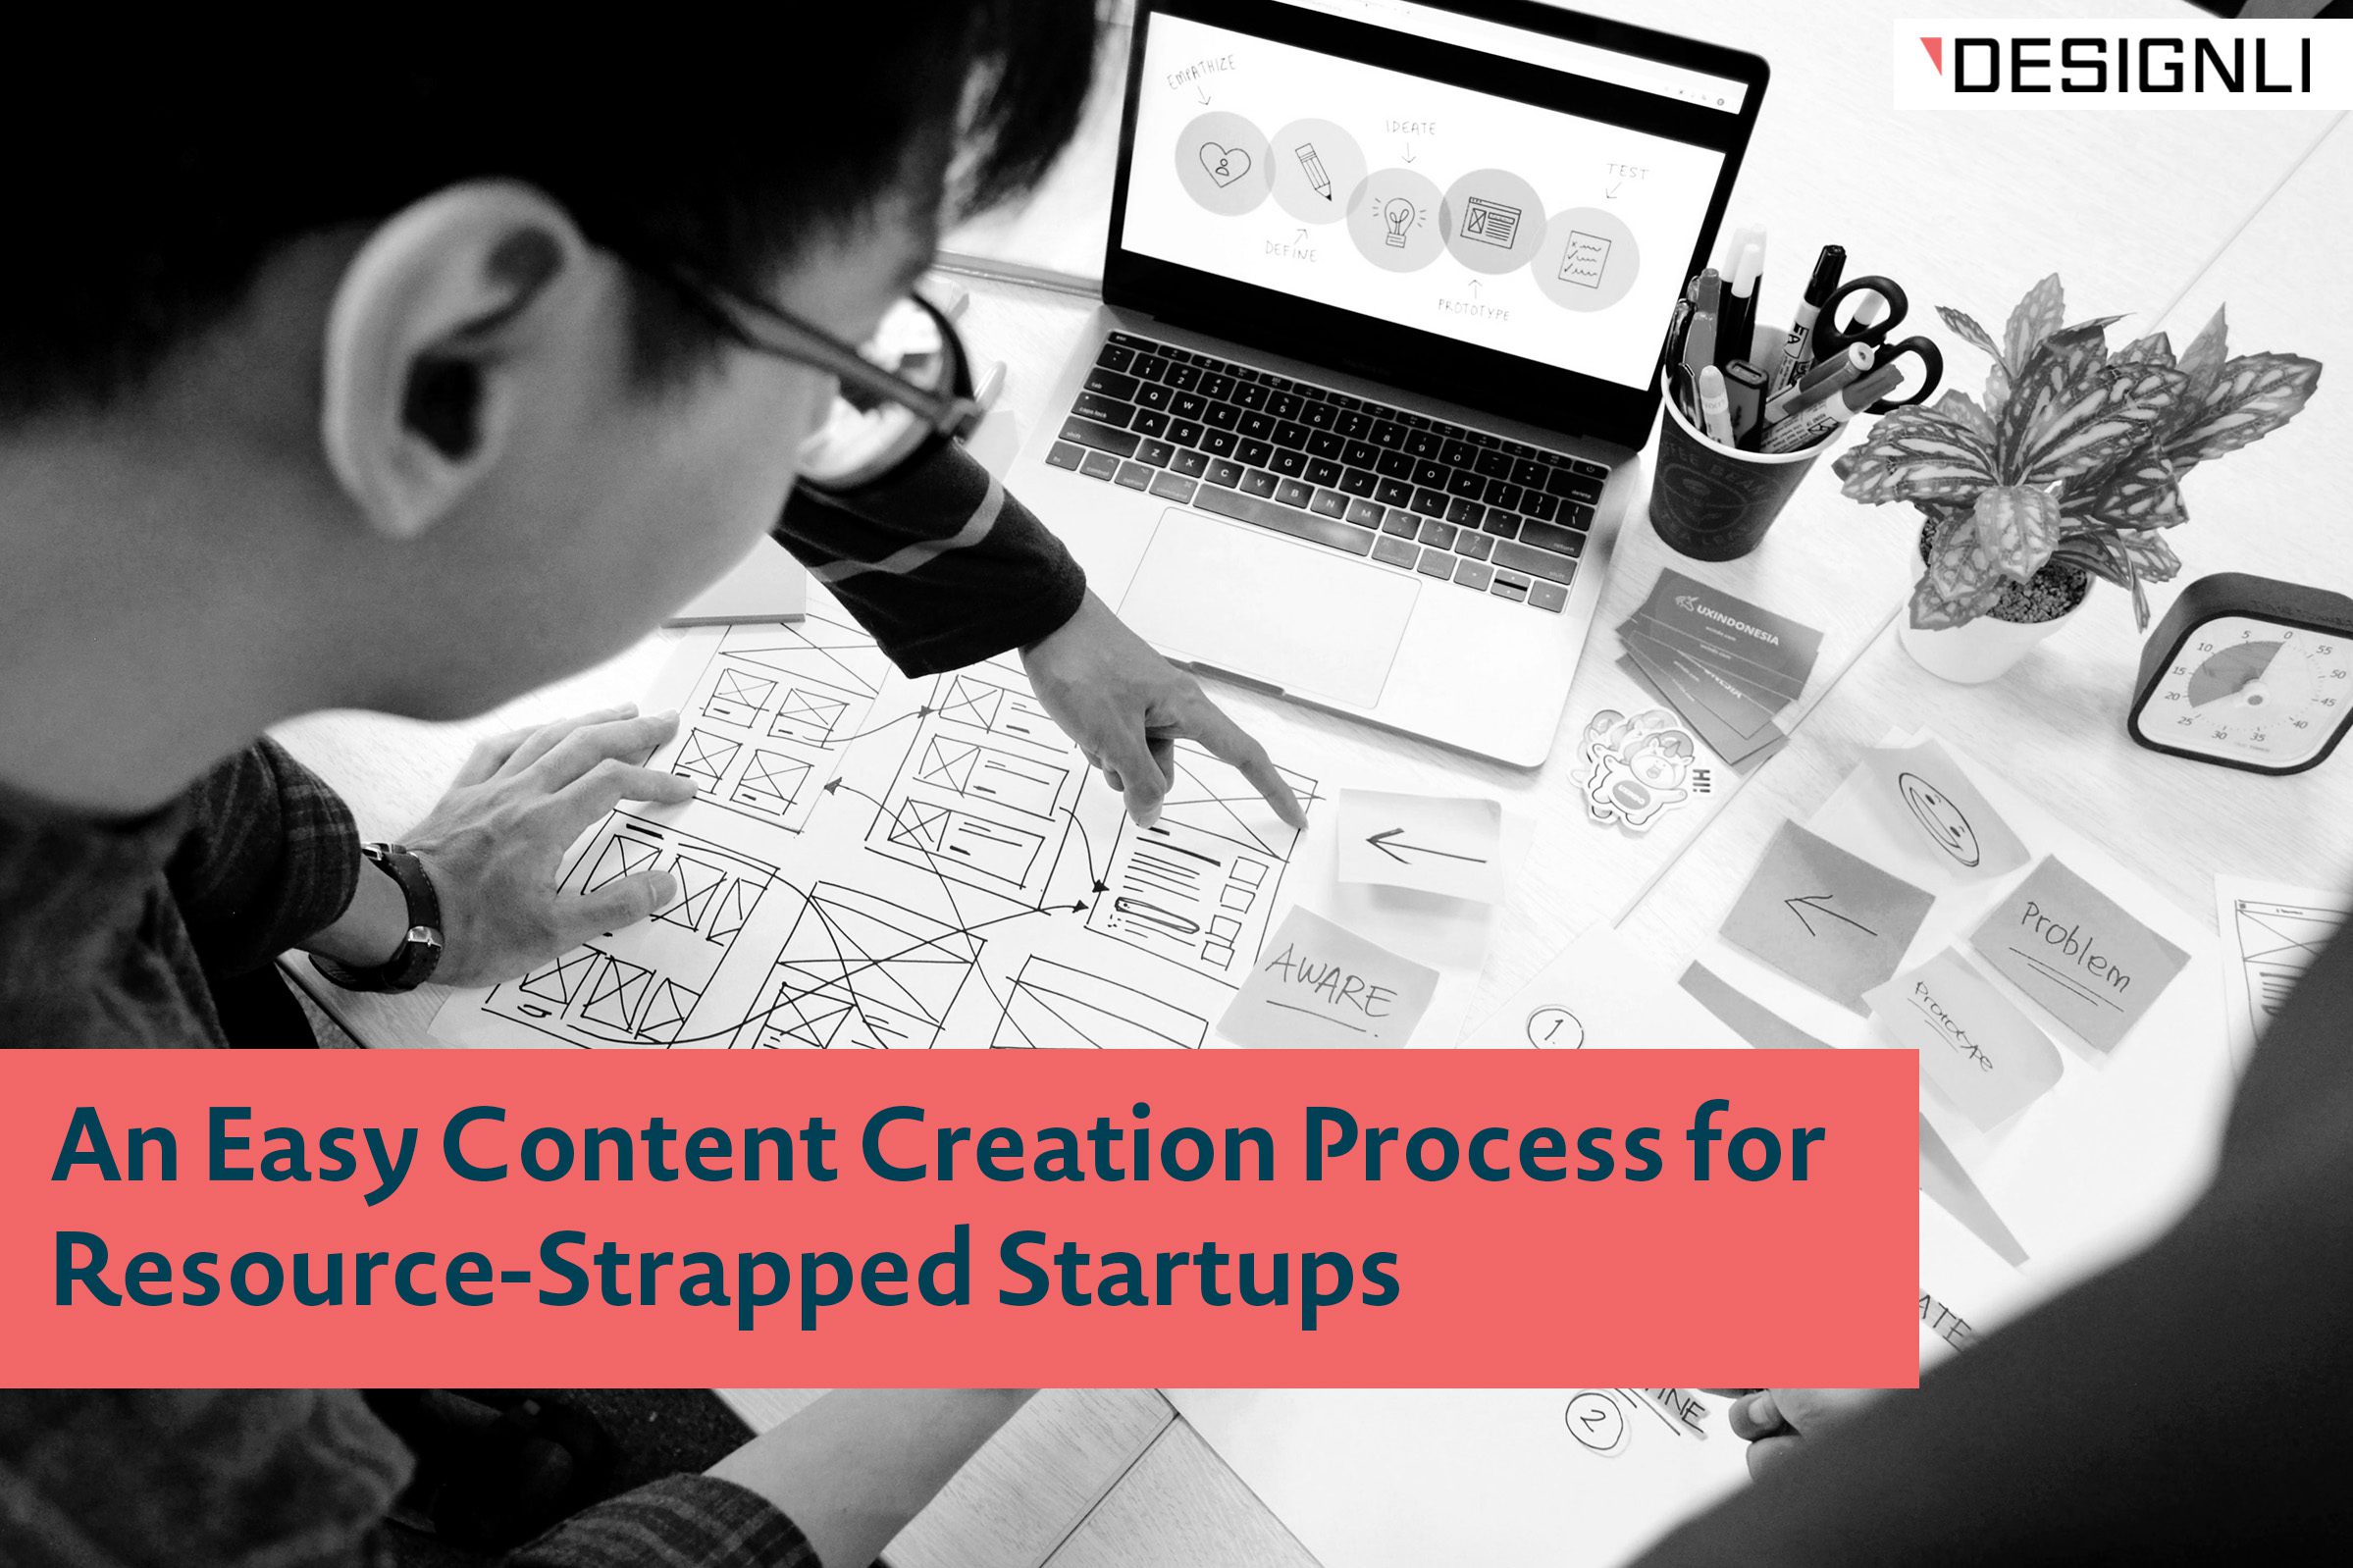 An Easy Content Creation Process for Resource-Strapped Startups